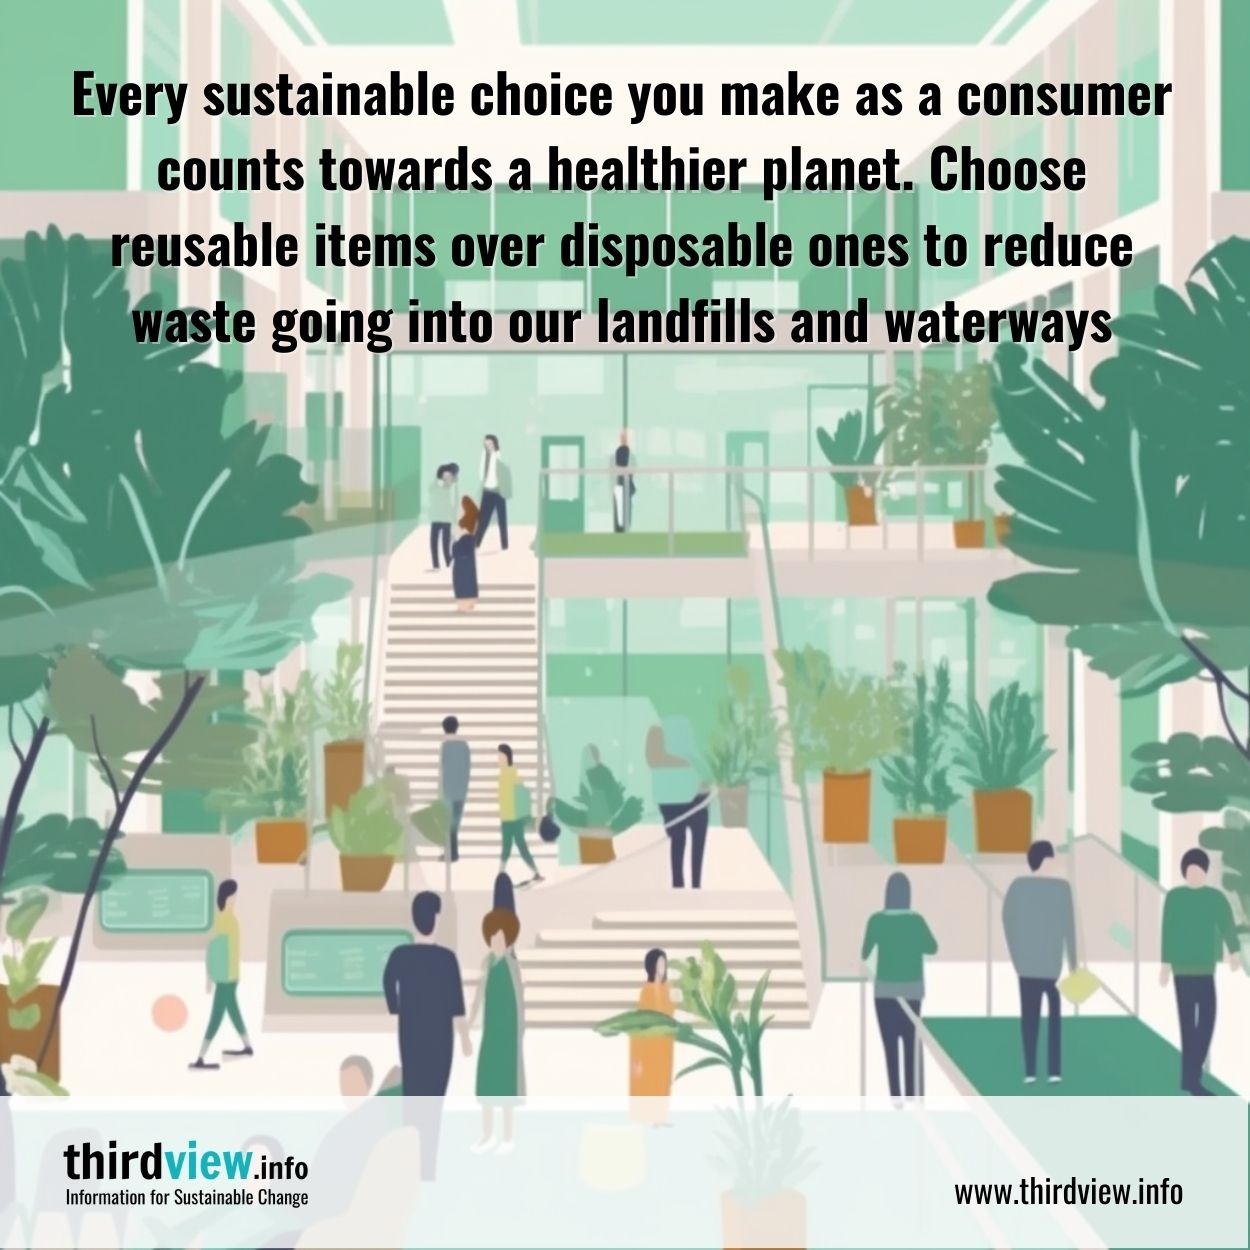 Understanding what today's eco-conscious food consumers want